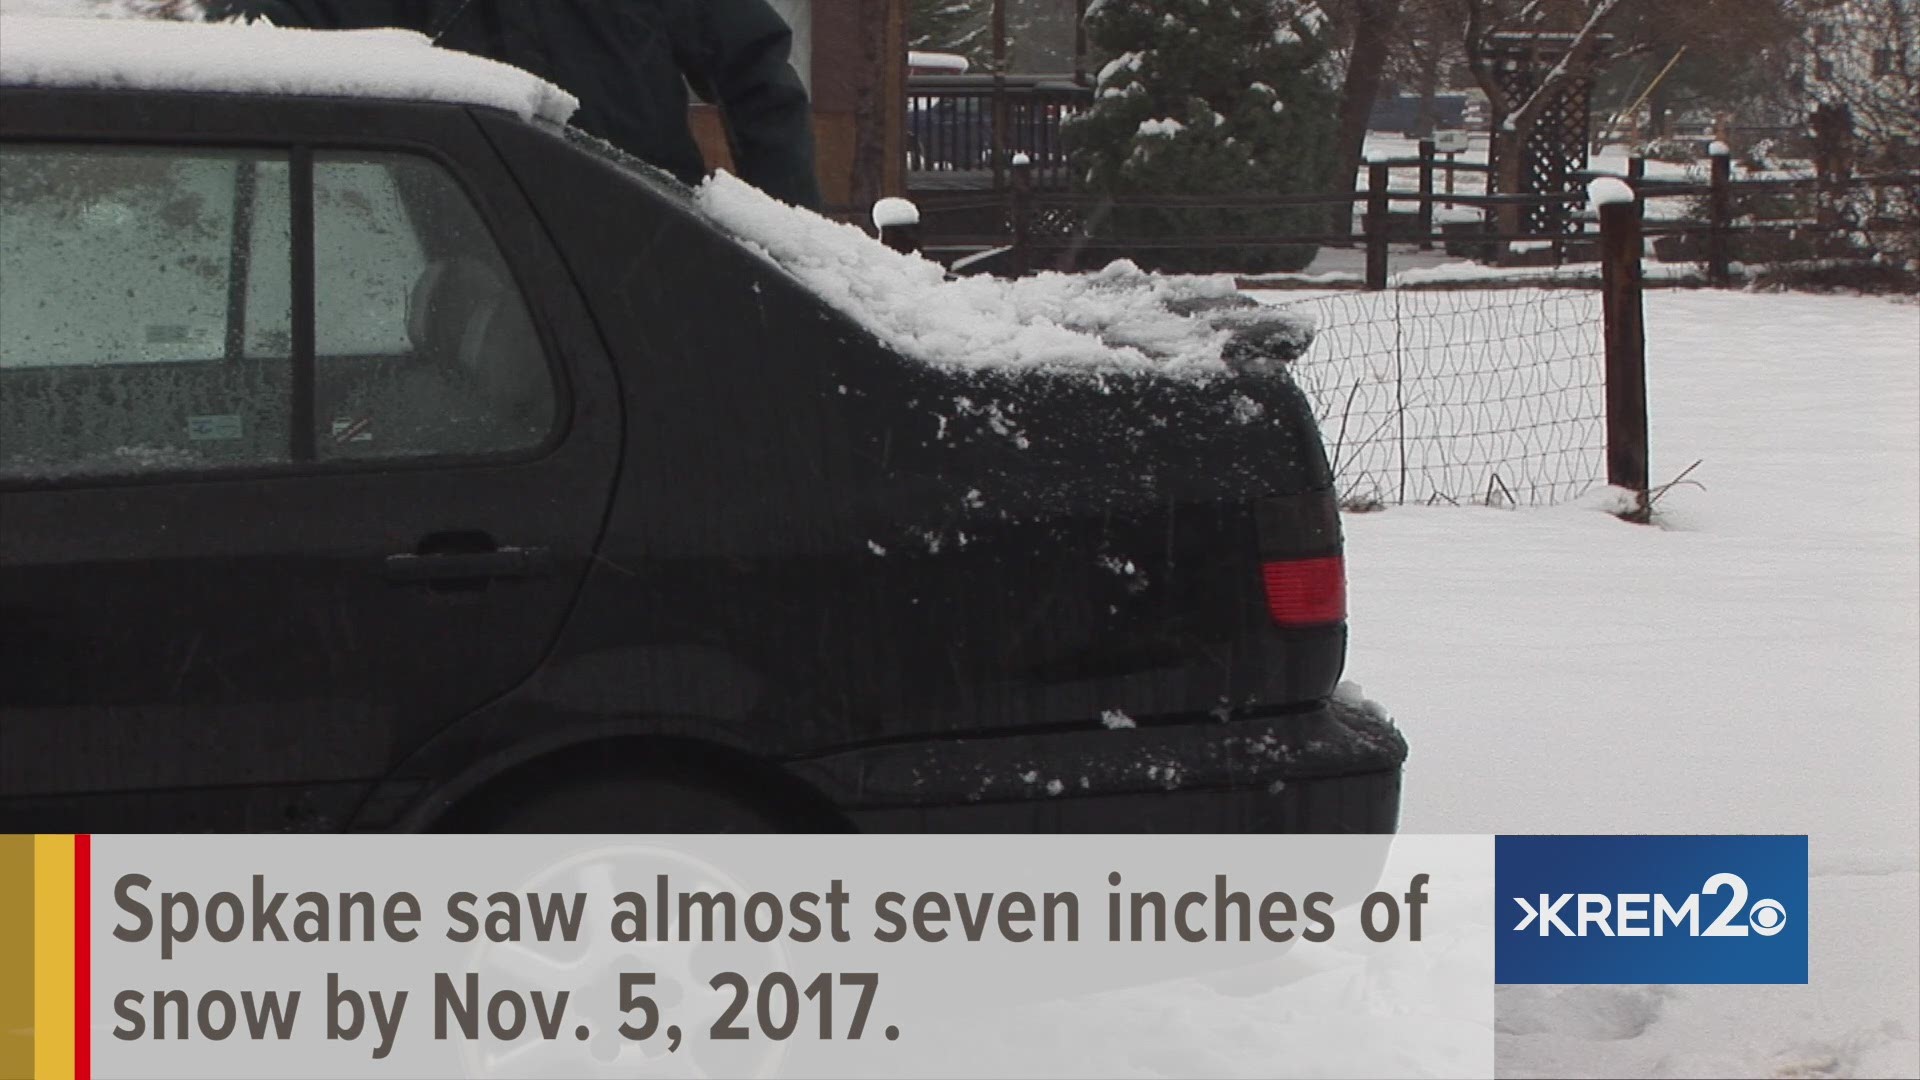 One year ago, Spokane saw 6.9 inches of snow by November 5. When can we expect snow in the 2018 forecast?